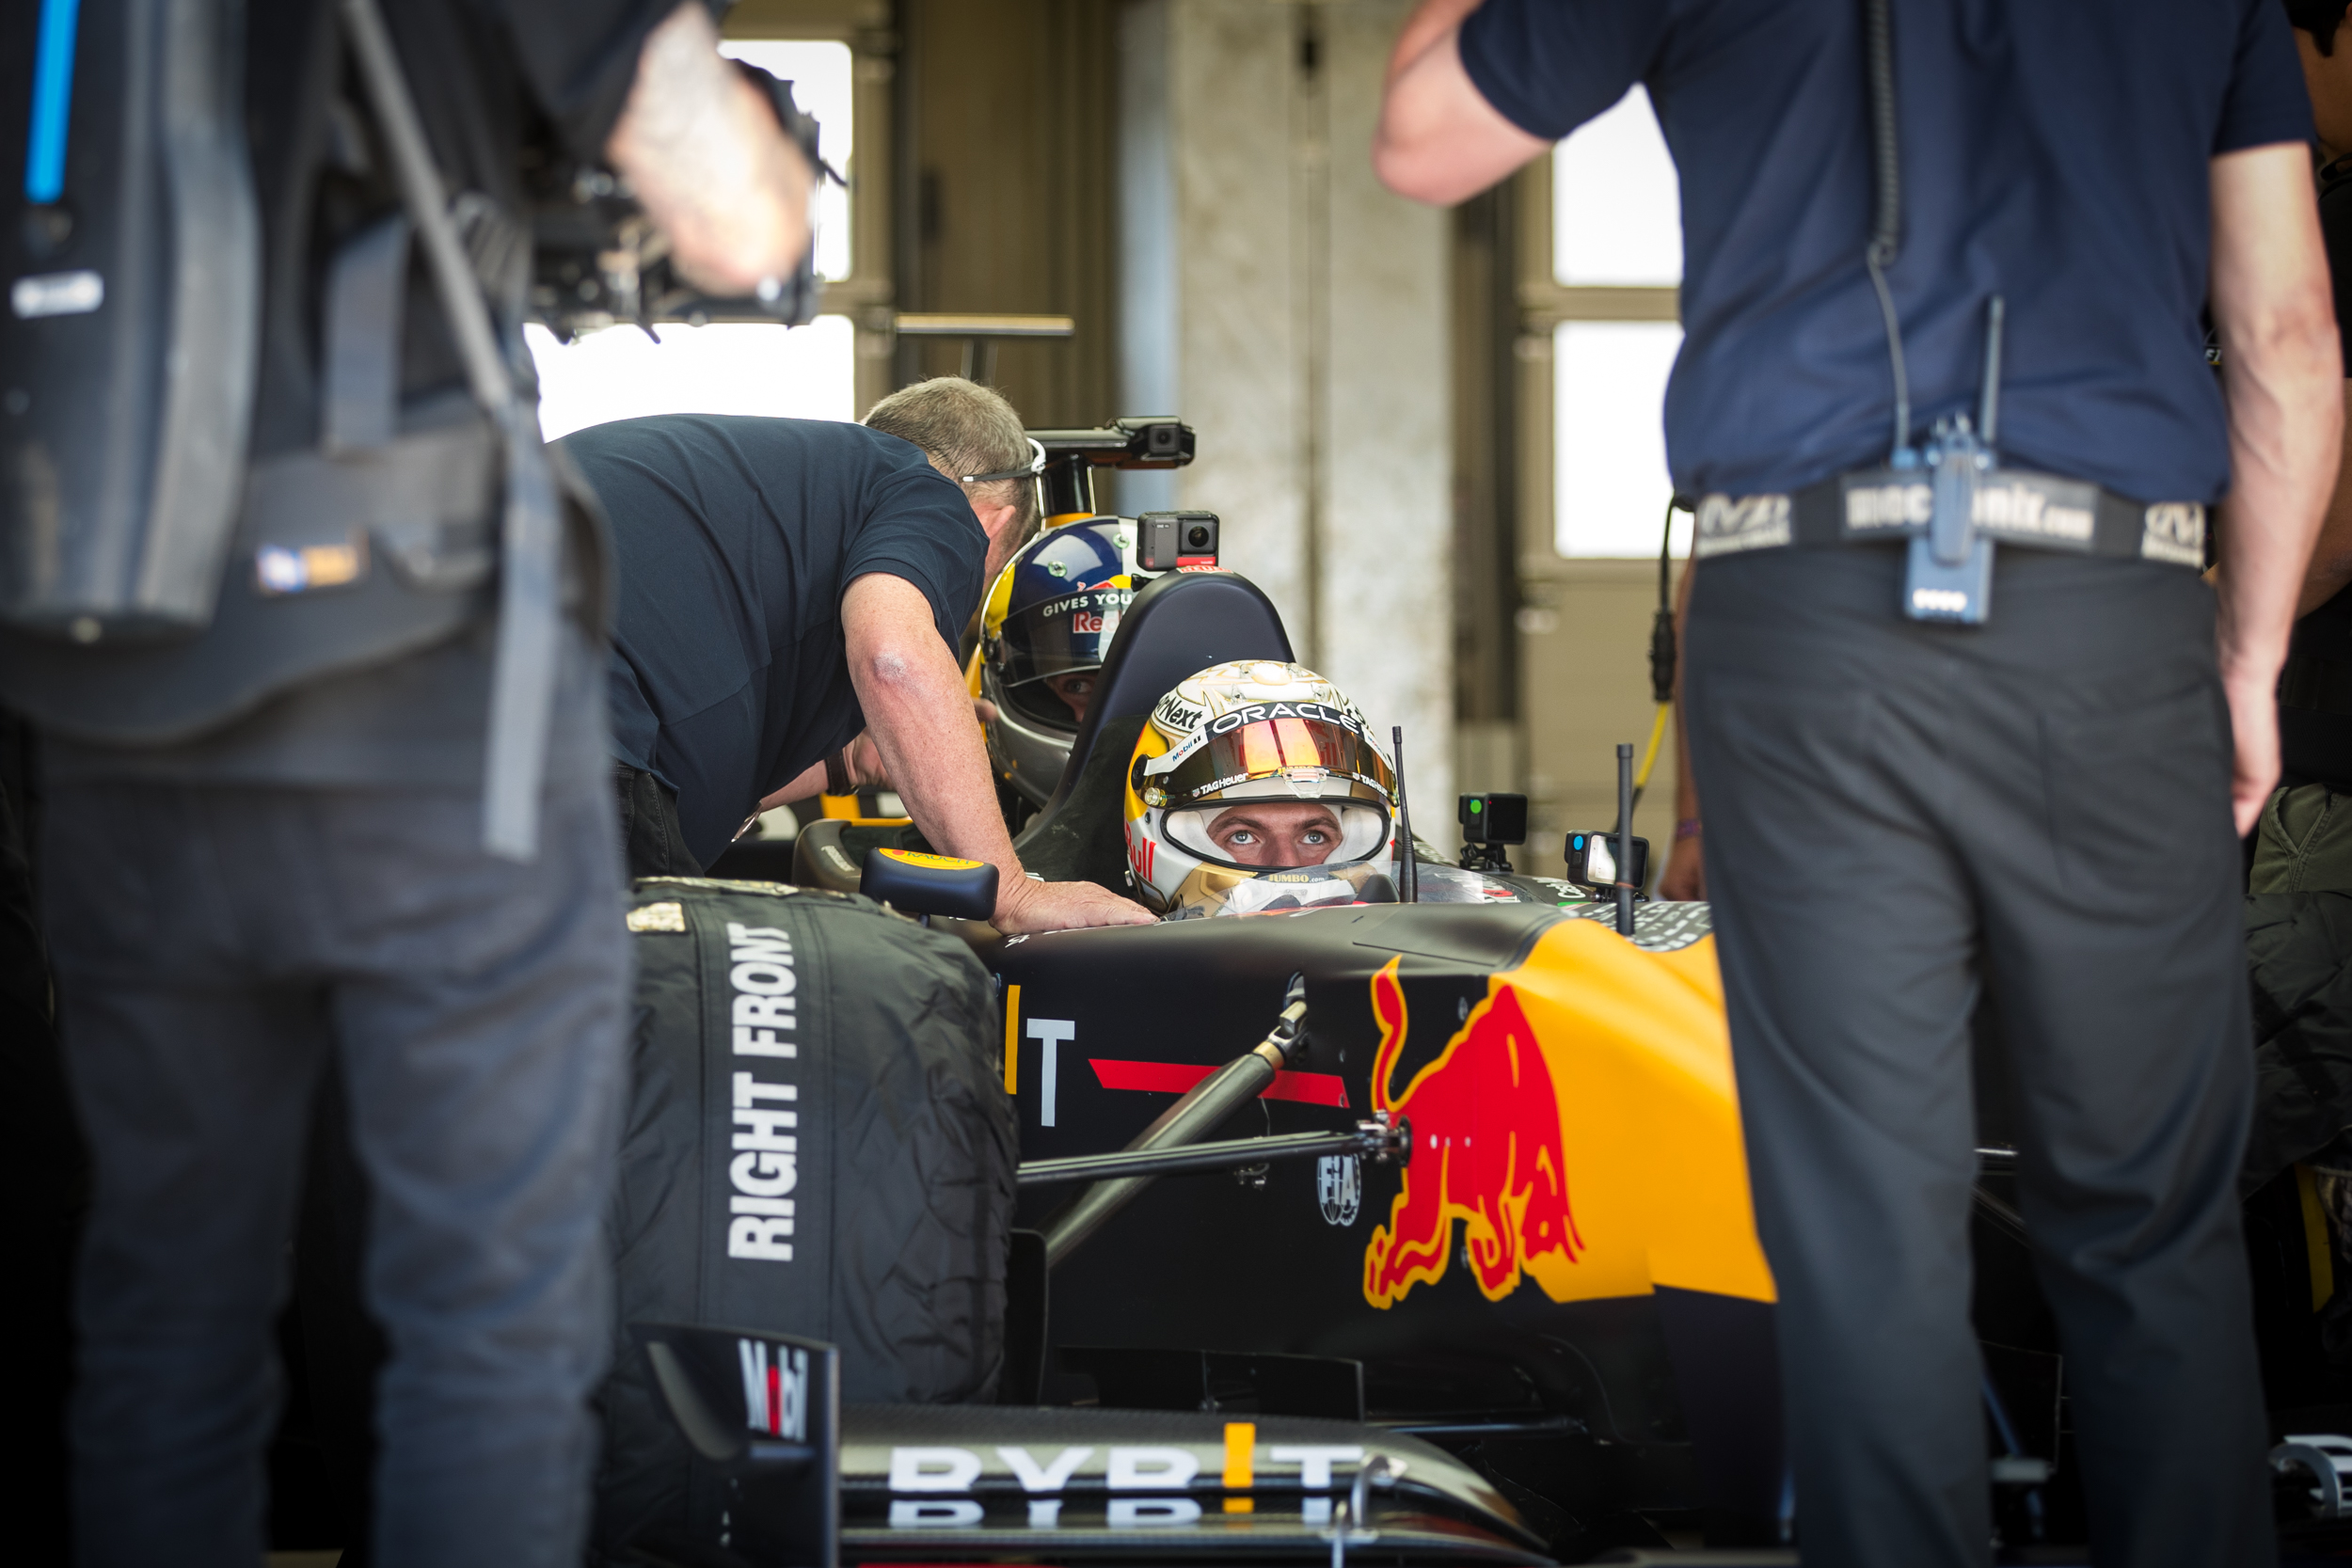 Fabio getting strapped in - Max Verstappen & Fabio Wibmer - Formula One - Seater Project - Red Bull Ring 2022